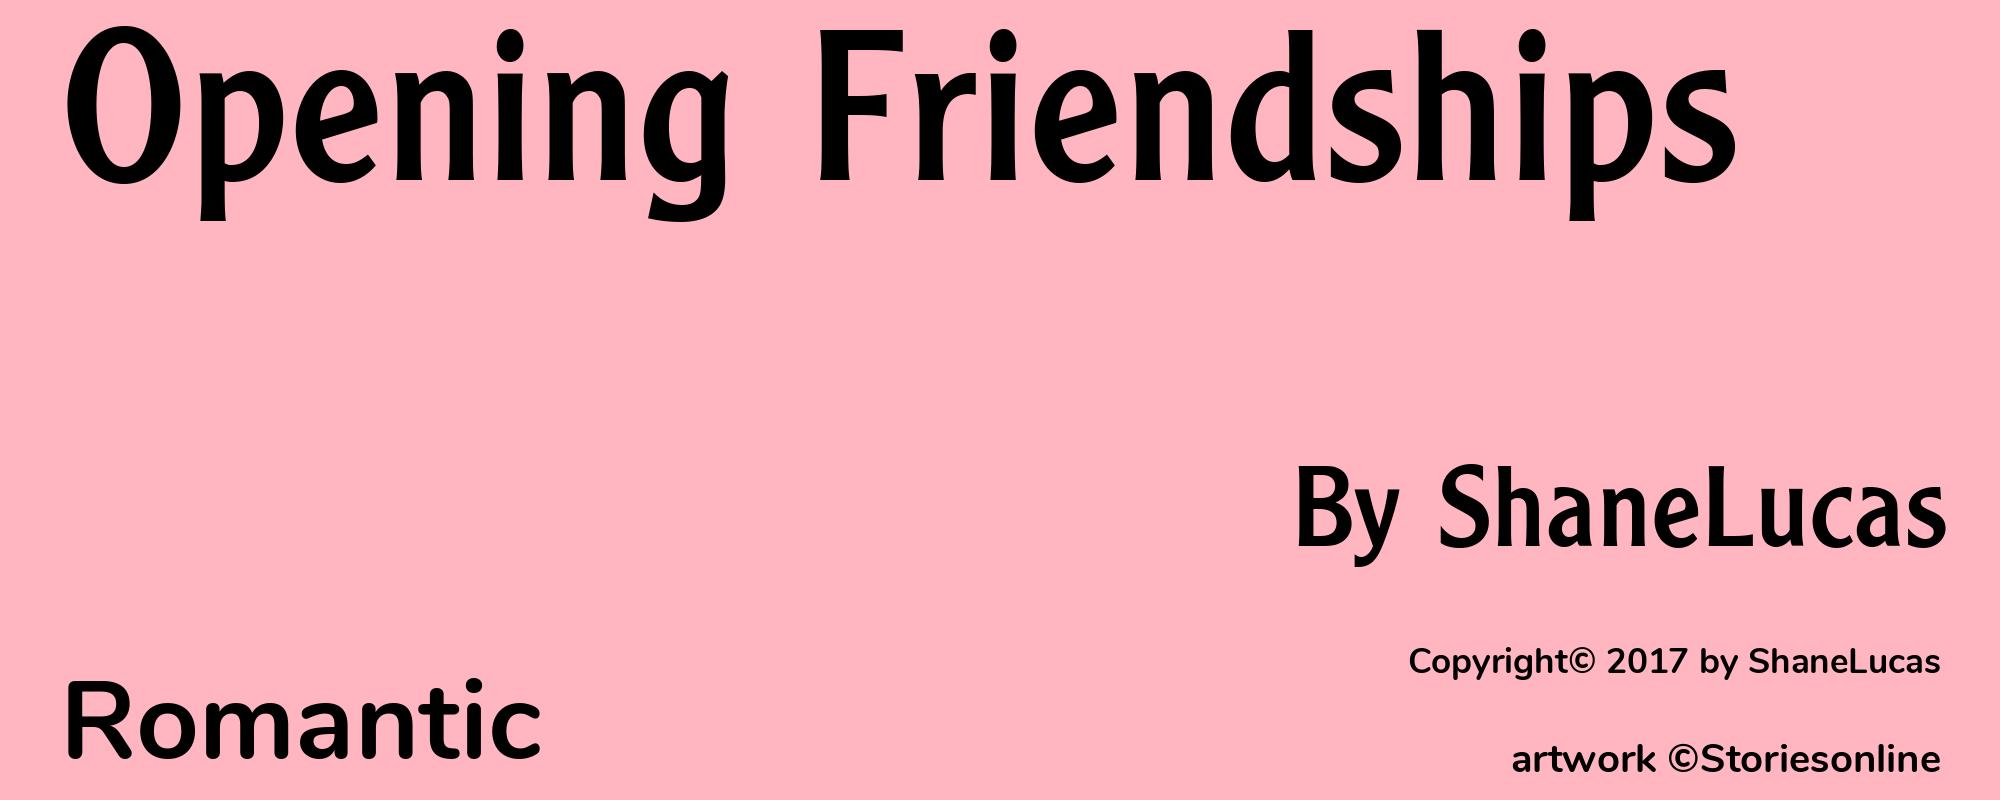 Opening Friendships - Cover